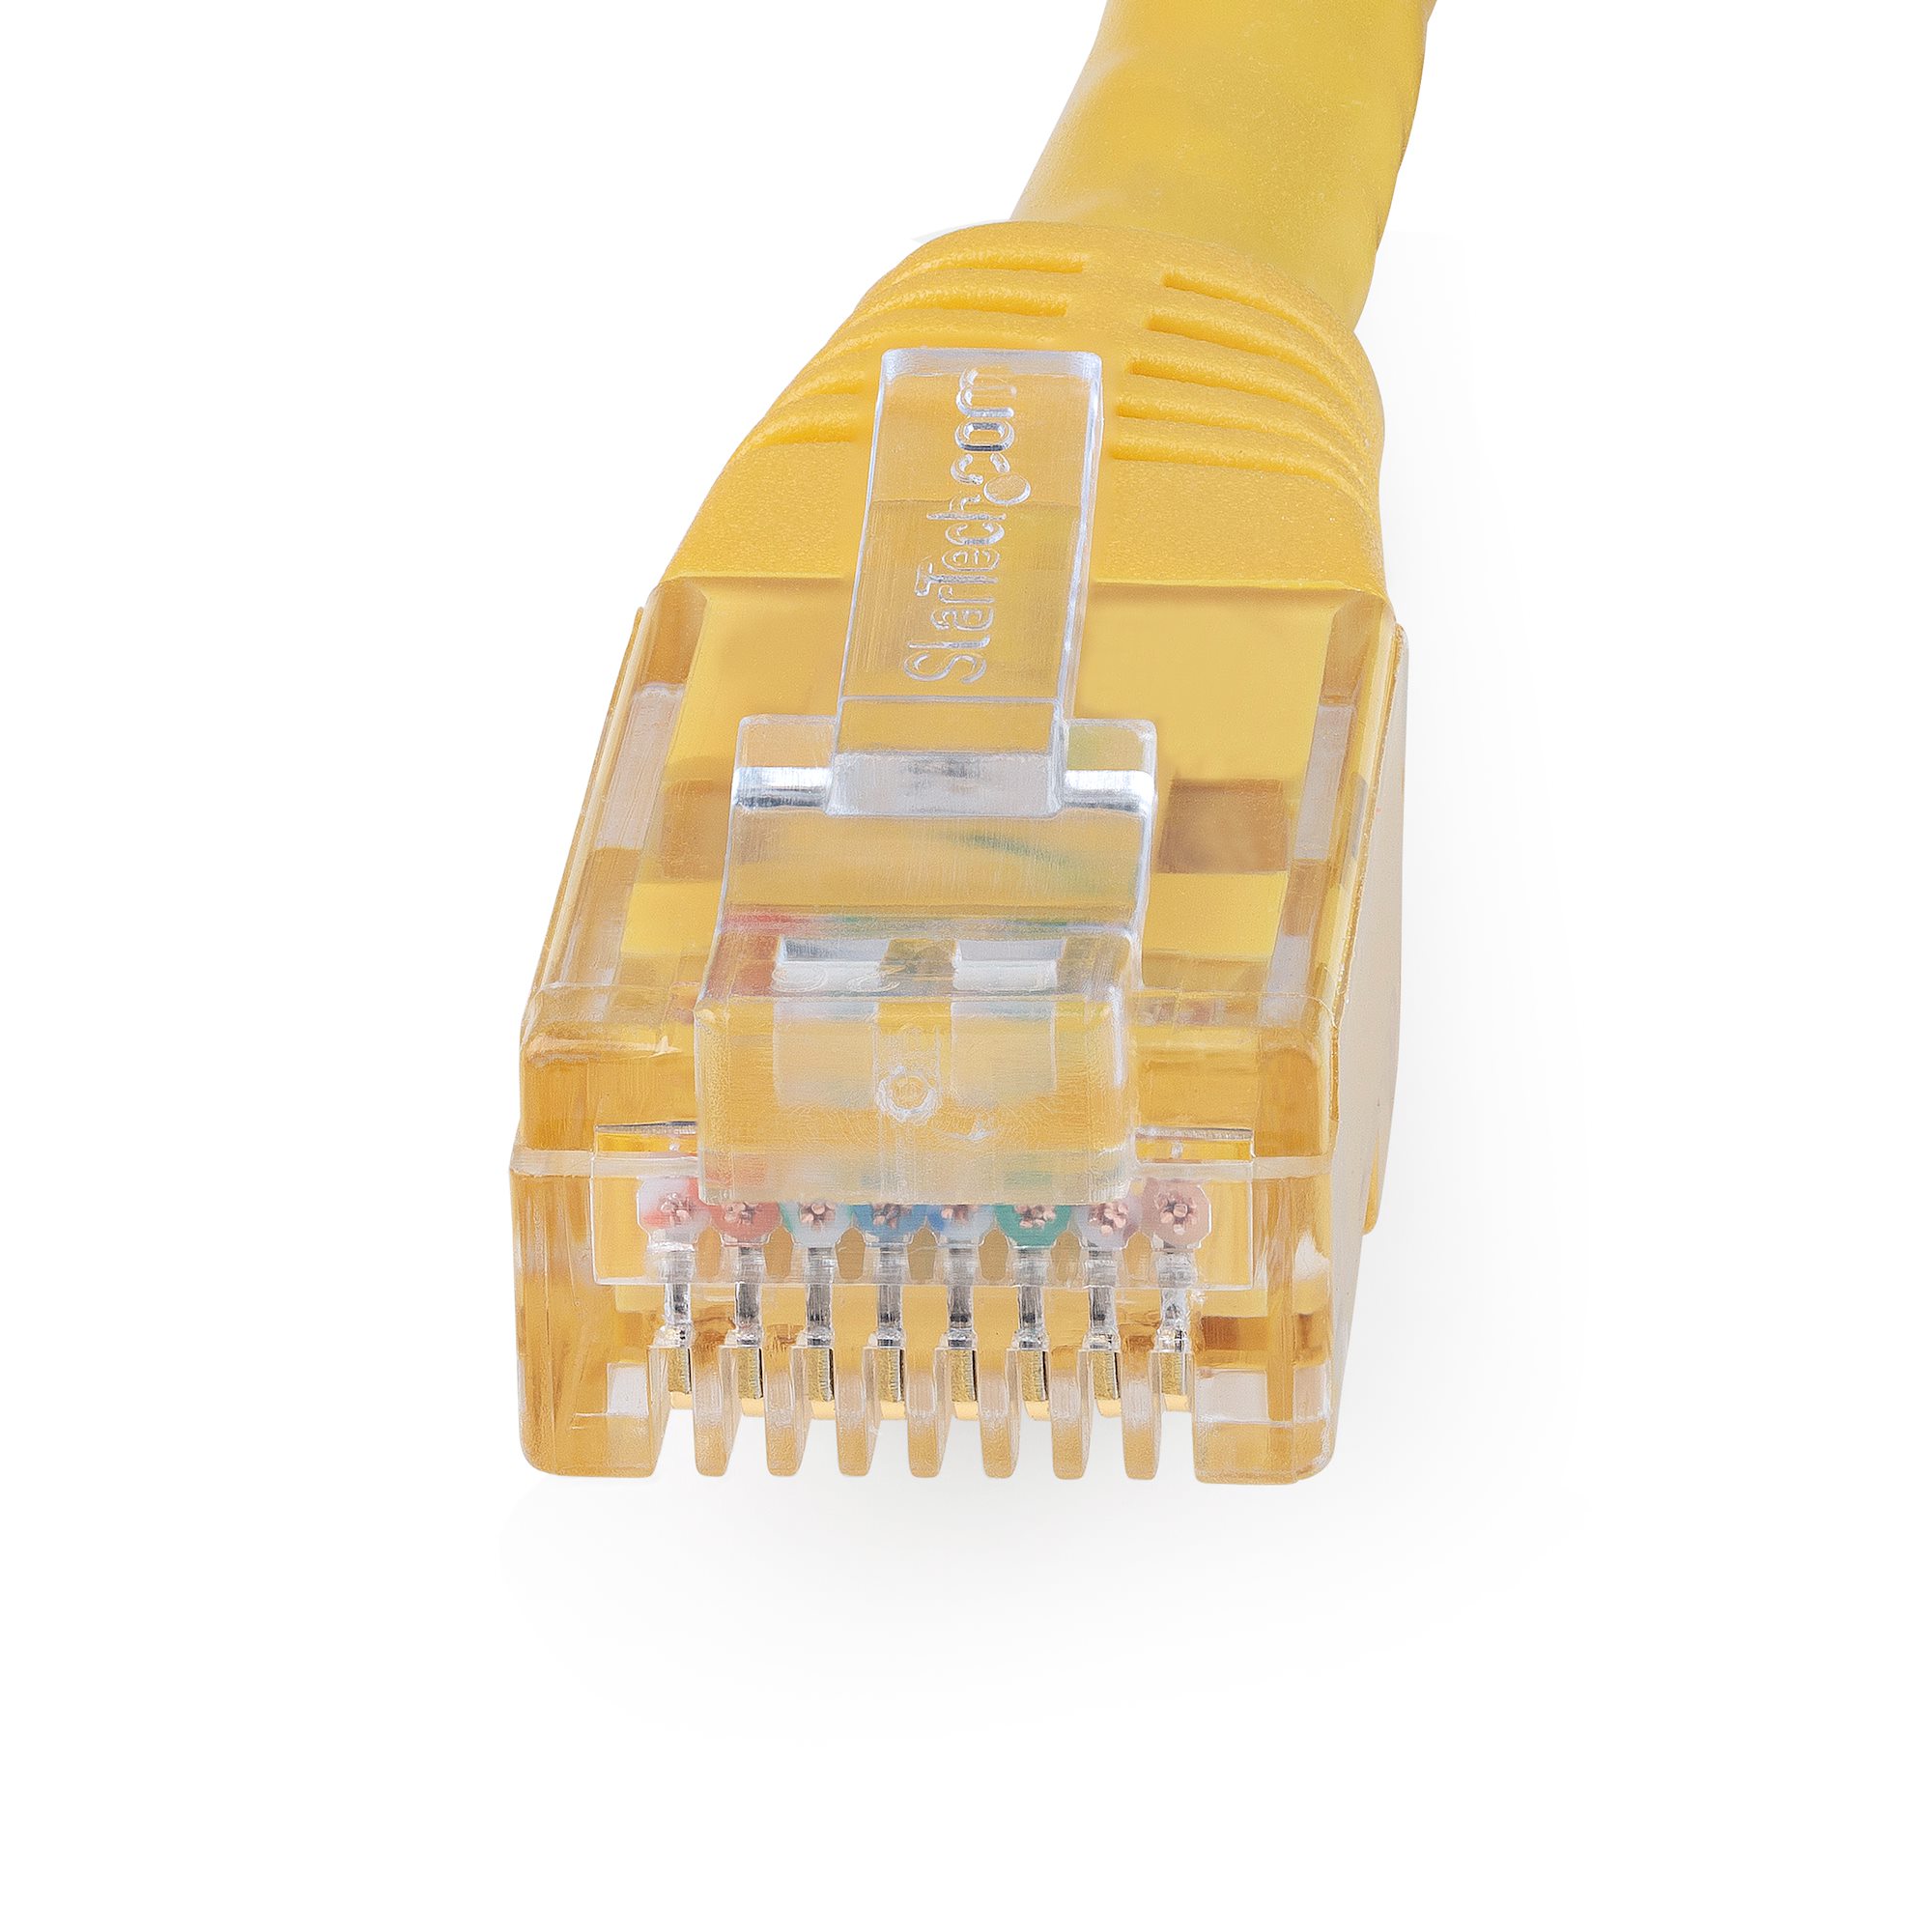 CAT6 CAT 6 Ethernet Cable Lan Network Internet Patch Cord Yellow POE RJ45 LOT 